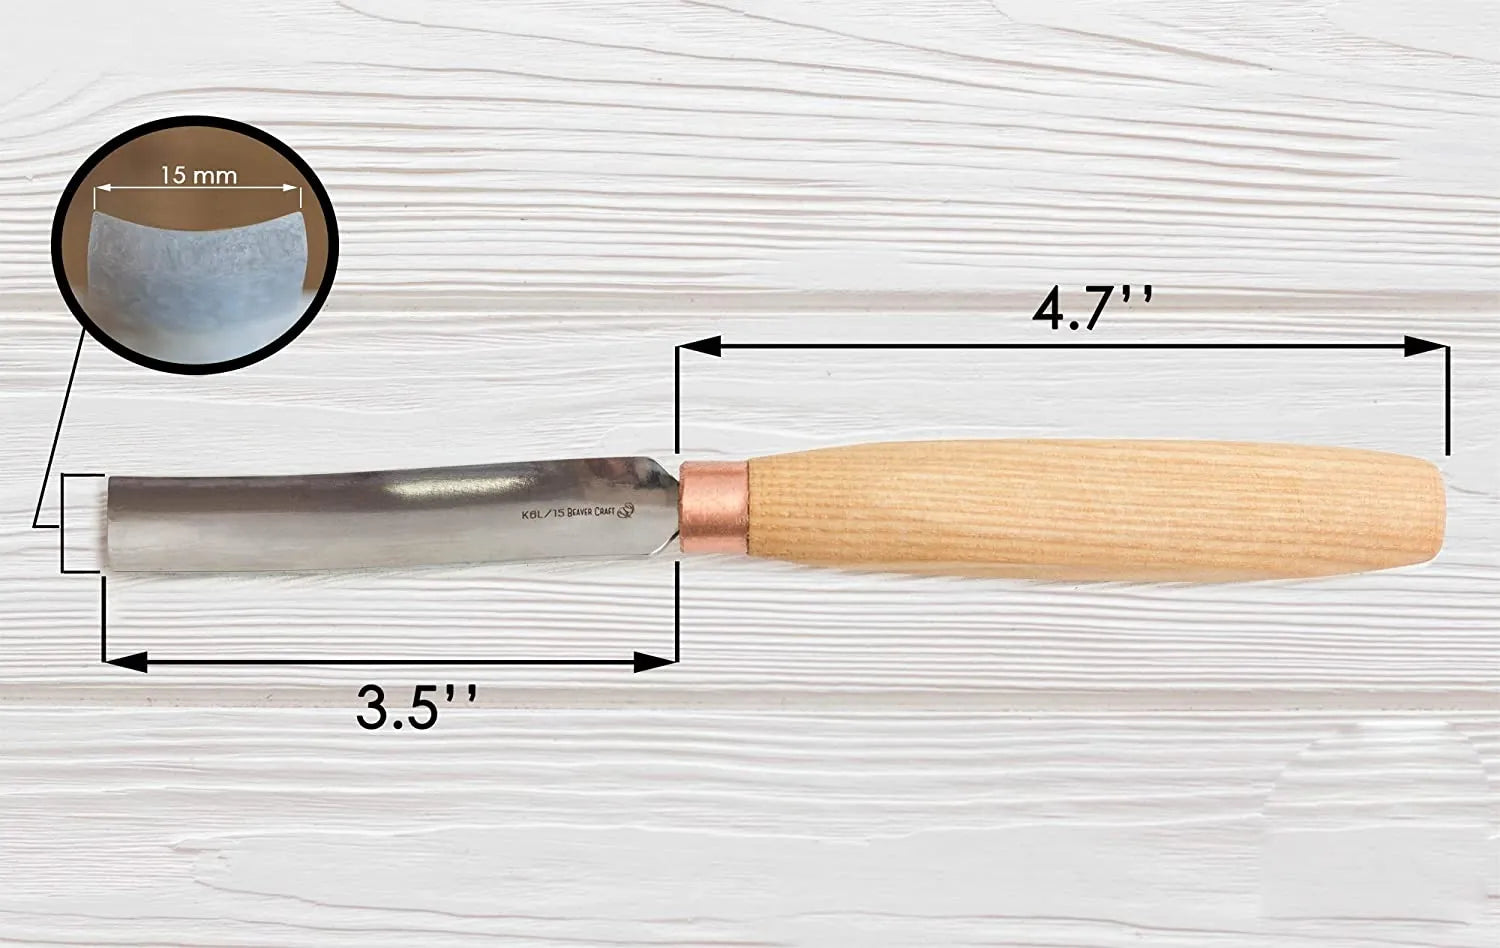 Small compact bent gouge